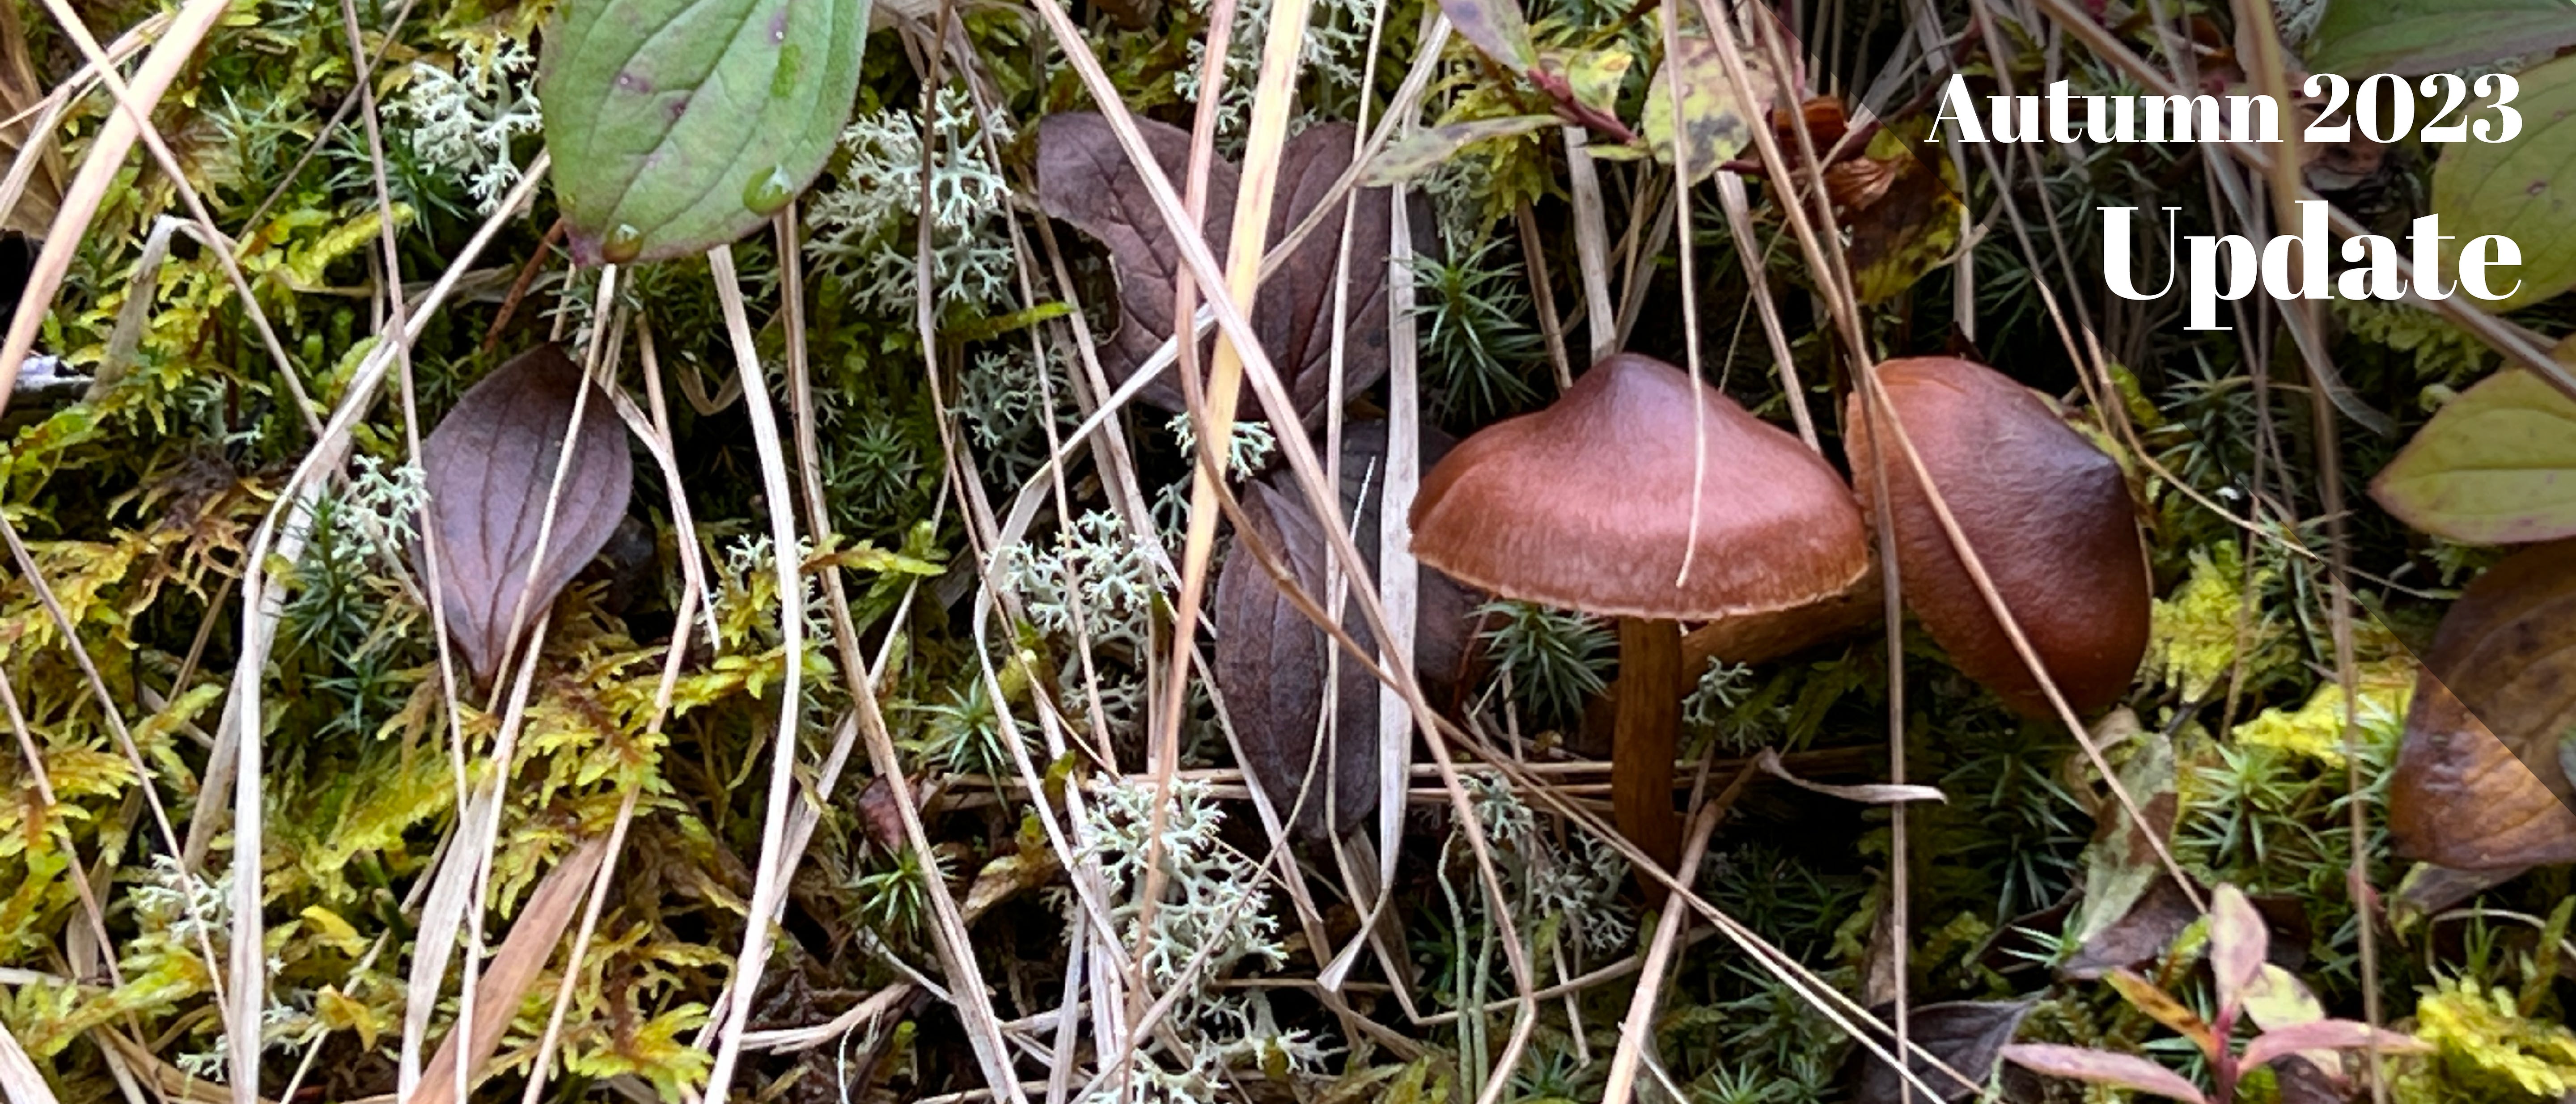 Close up photo of two brown mushrooms growing on a mossy bed with dark brown fallen leaves scattered among yellow blades of grass.